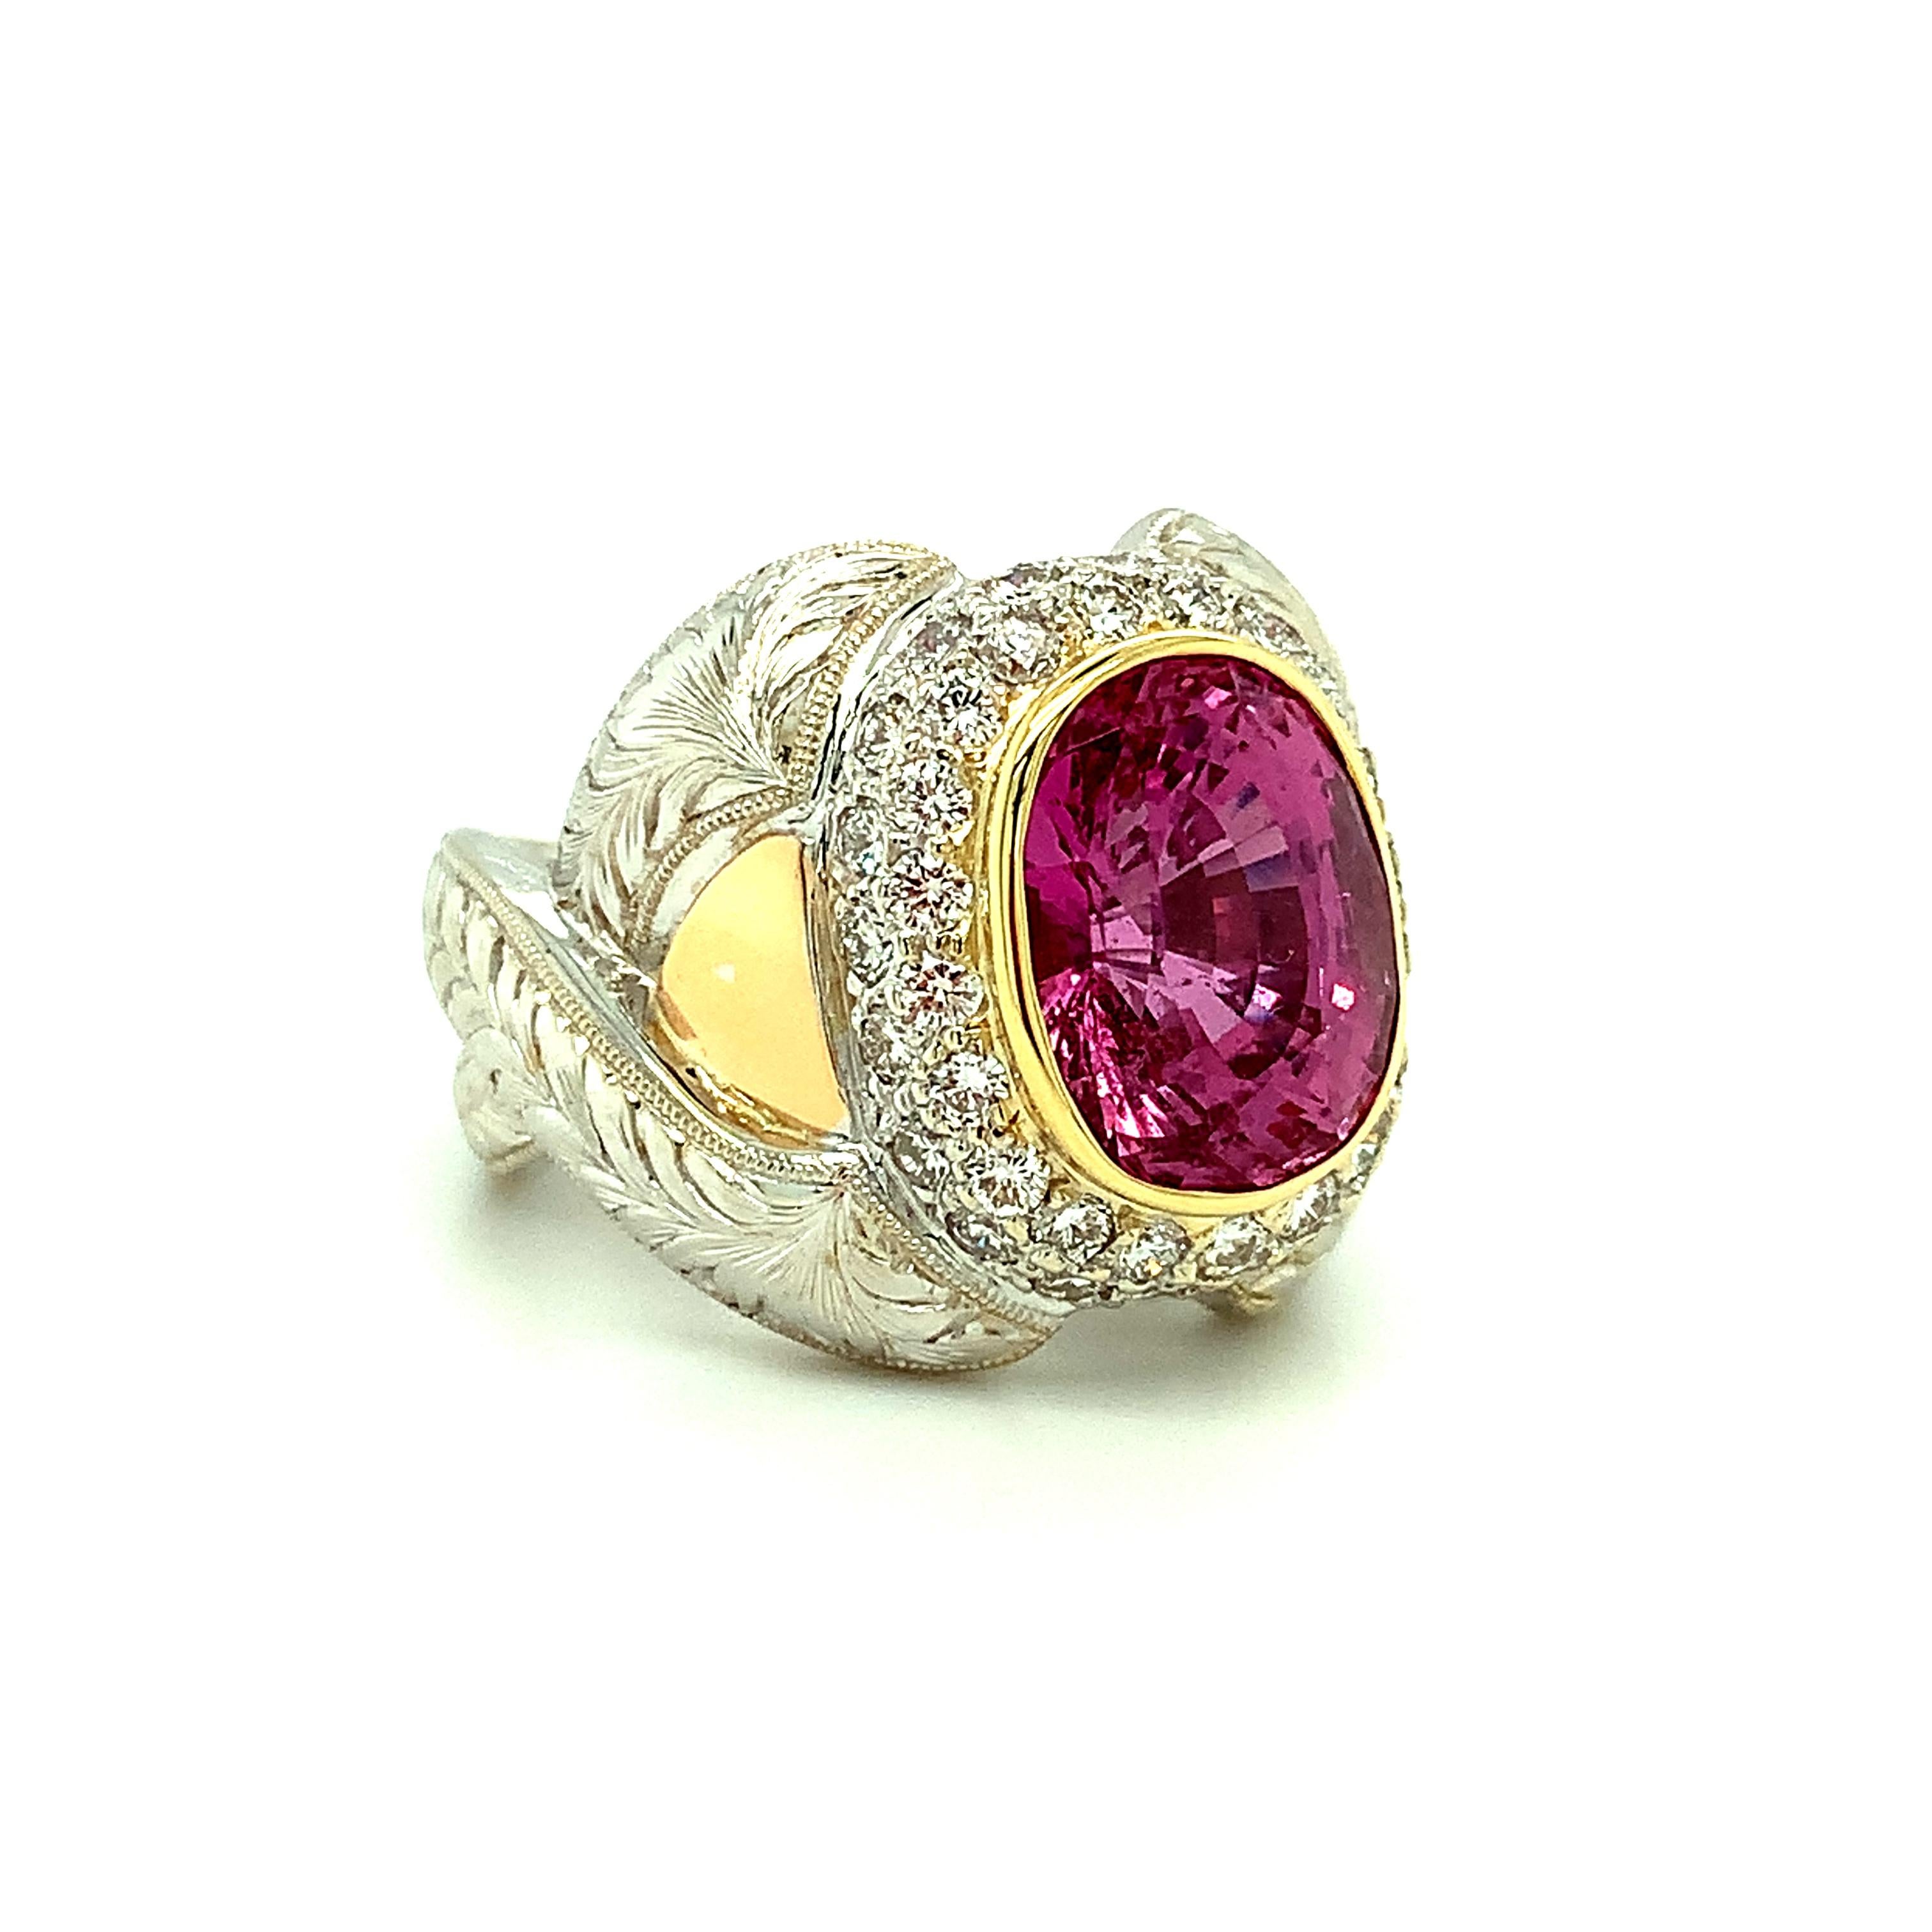 Cushion Cut GIA Certified 7.08 Carat Pink Sapphire and Diamond Cocktail Ring in 18k Gold For Sale